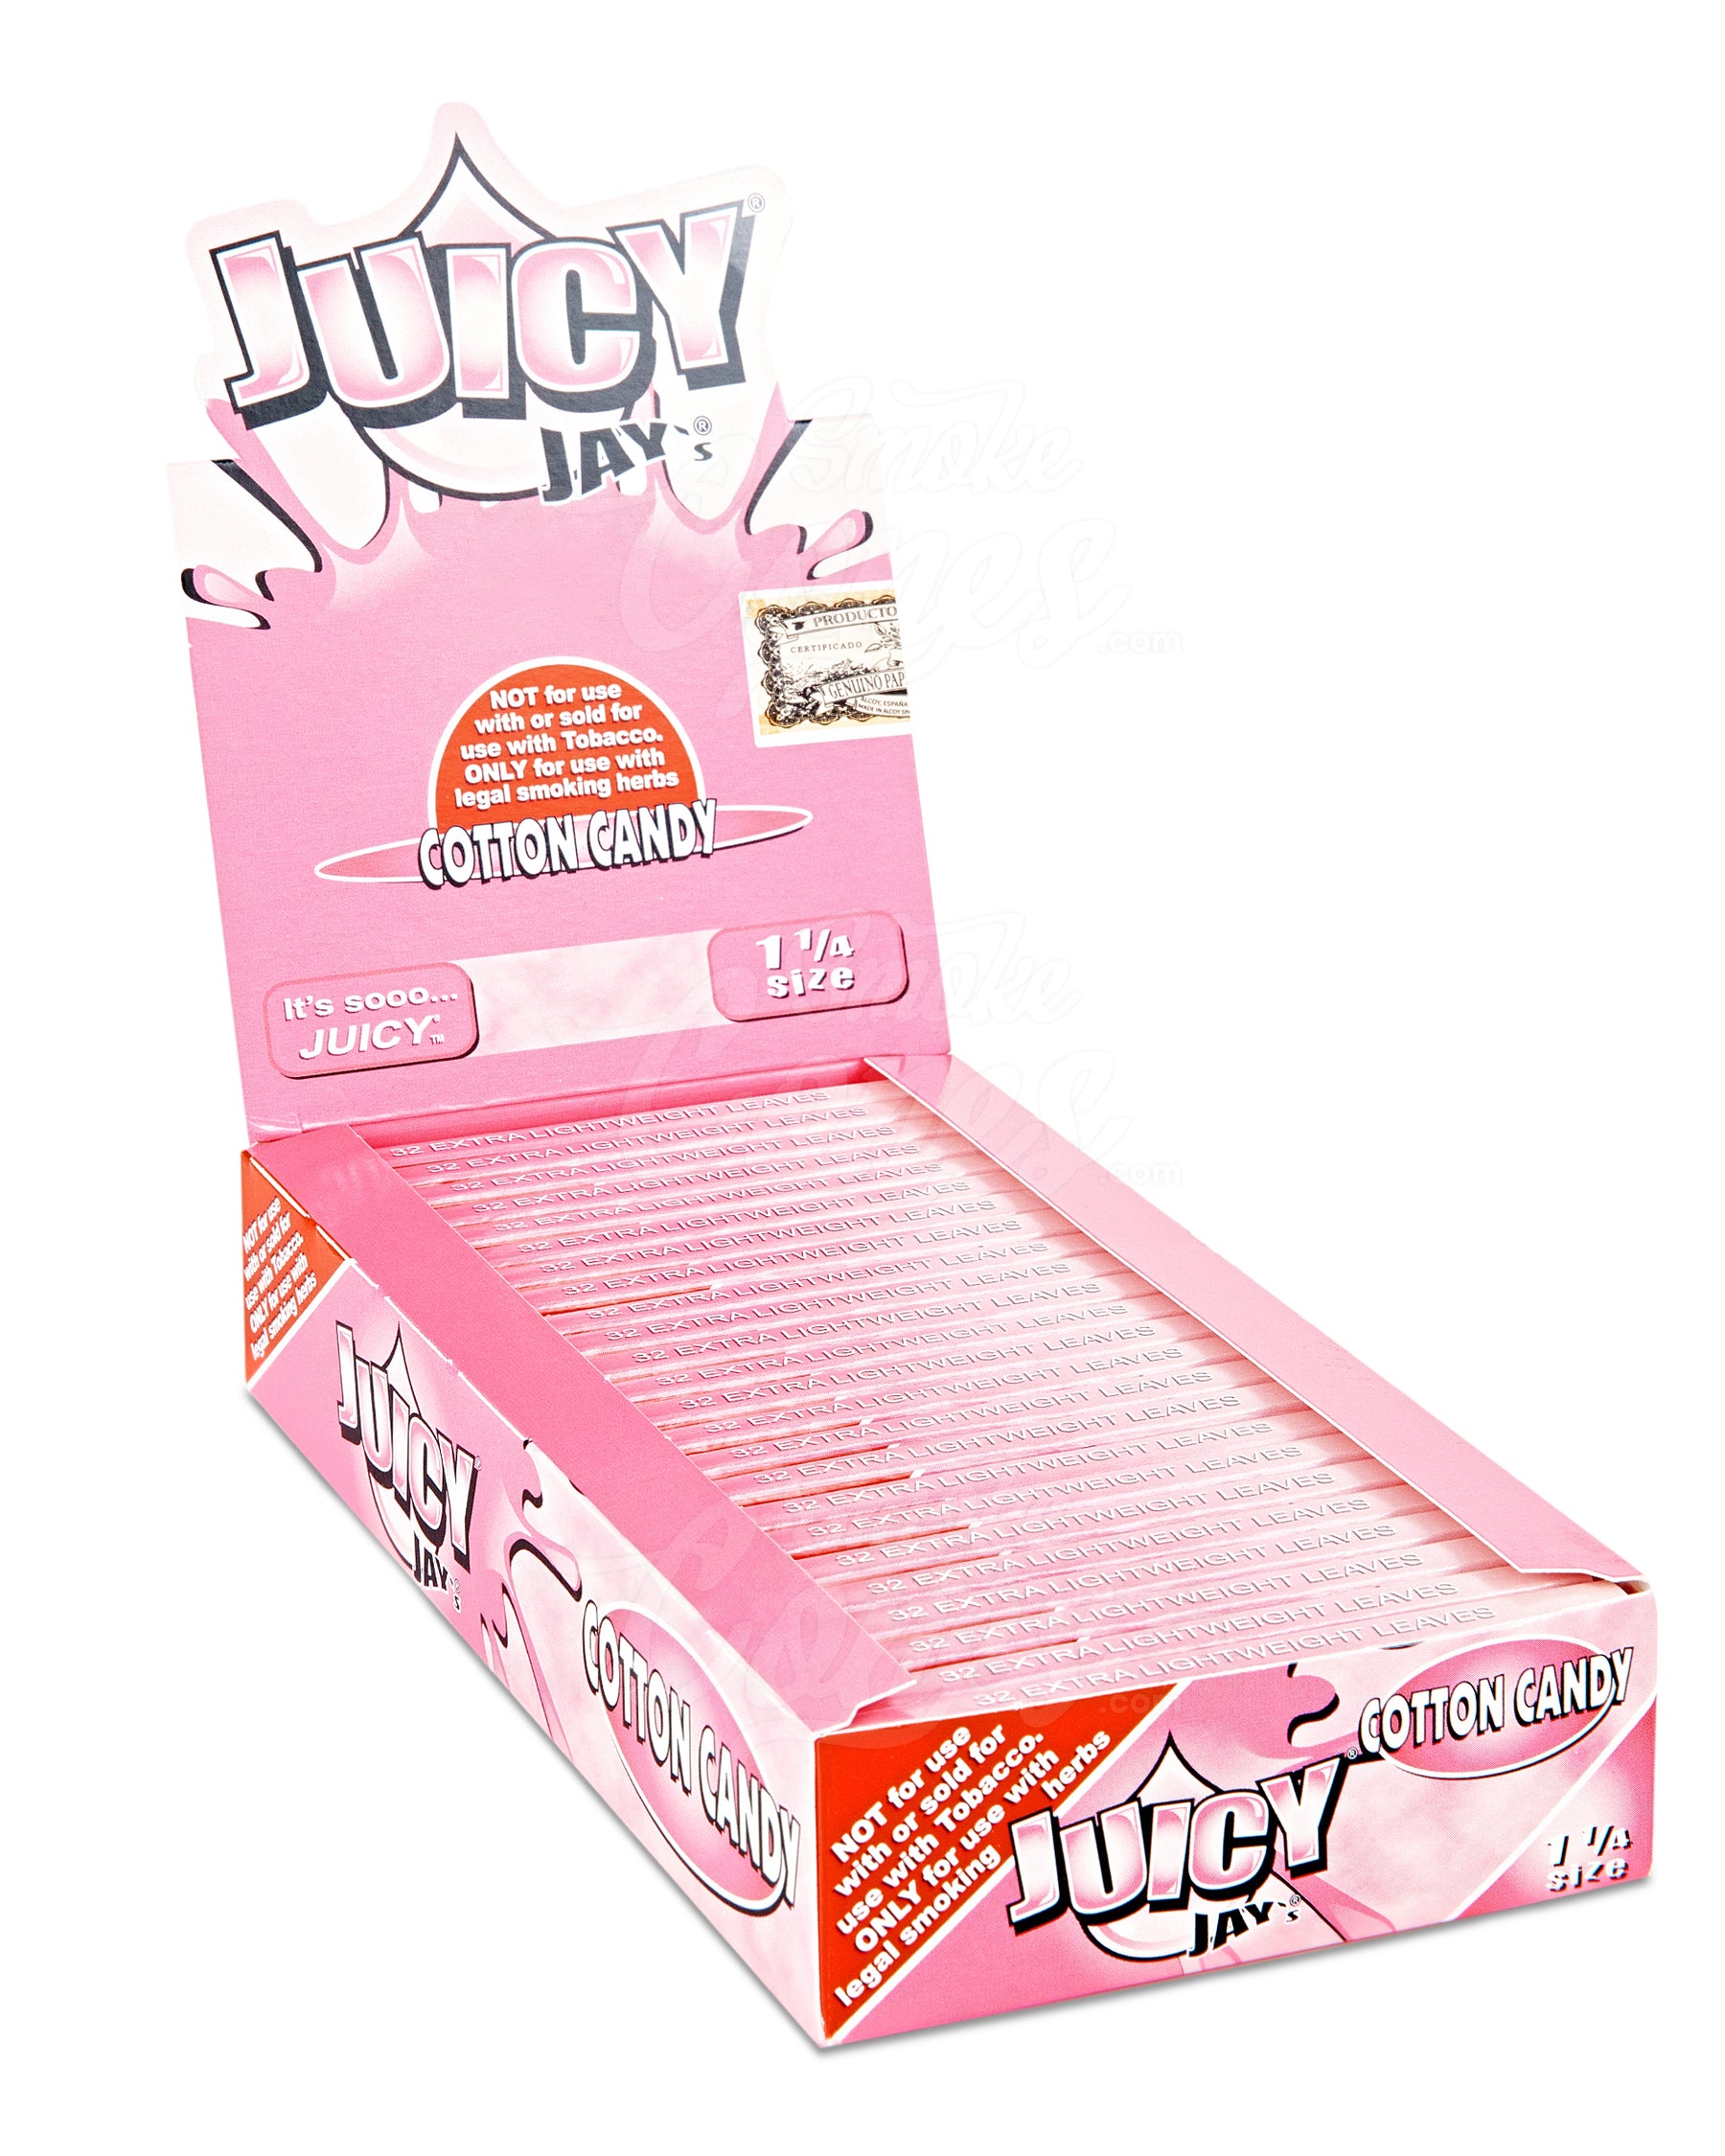 Juicy Jay's 1 1-4 Size Cotton Candy Flavored Hemp Rolling Papers 24/Box - 1